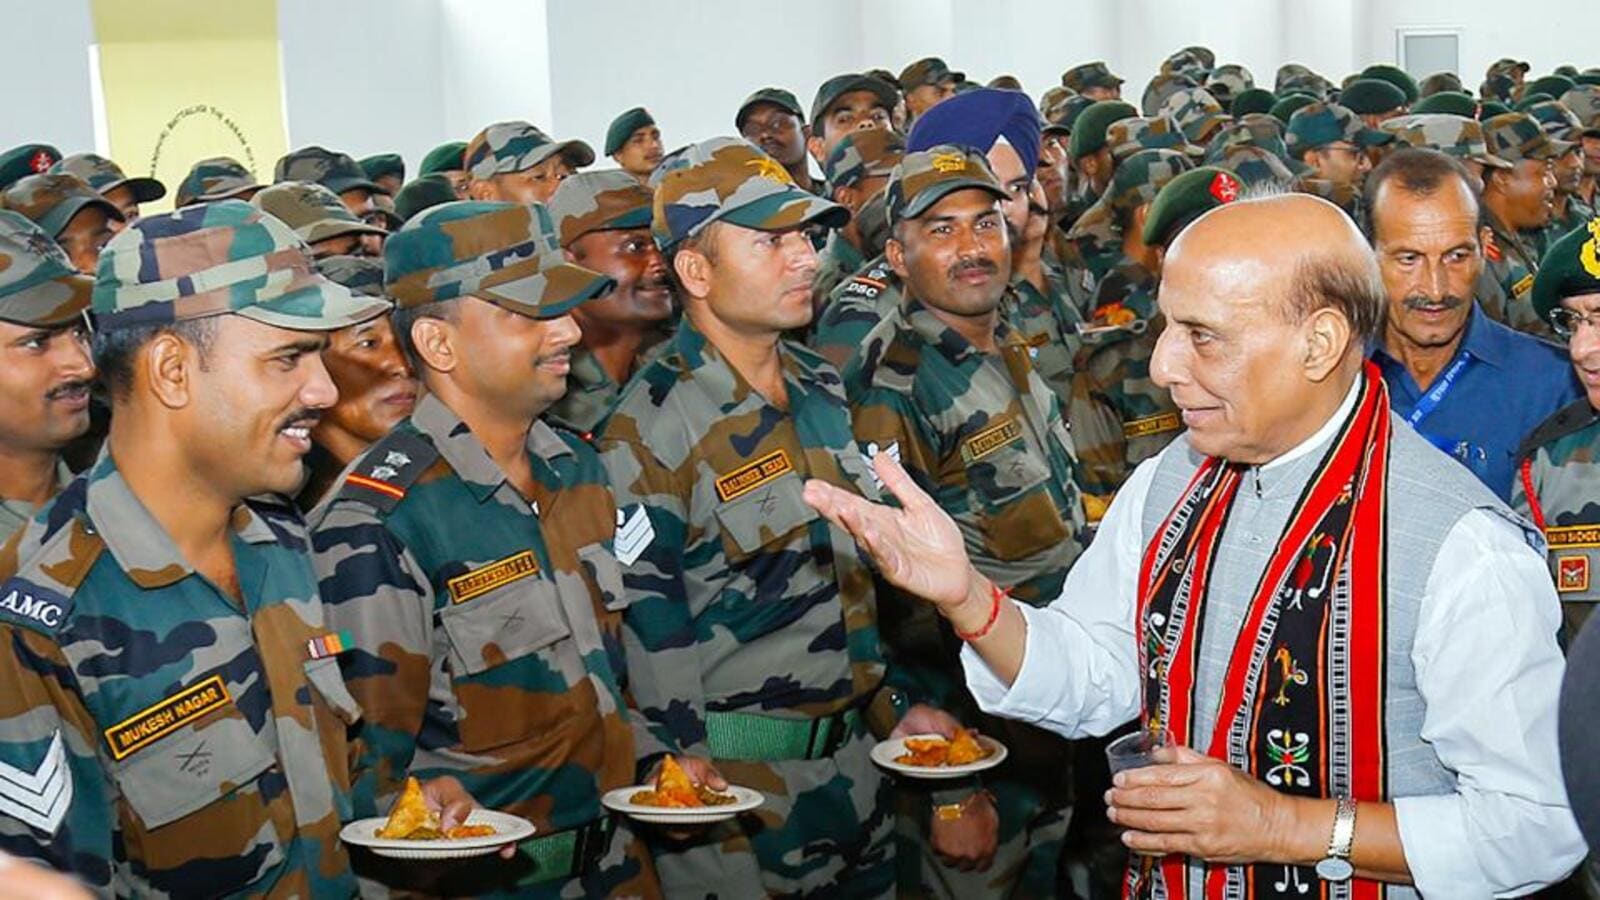 Couldn't fulfil dream of joining army due to family problems: Rajnath Singh  | Latest News India - Hindustan Times